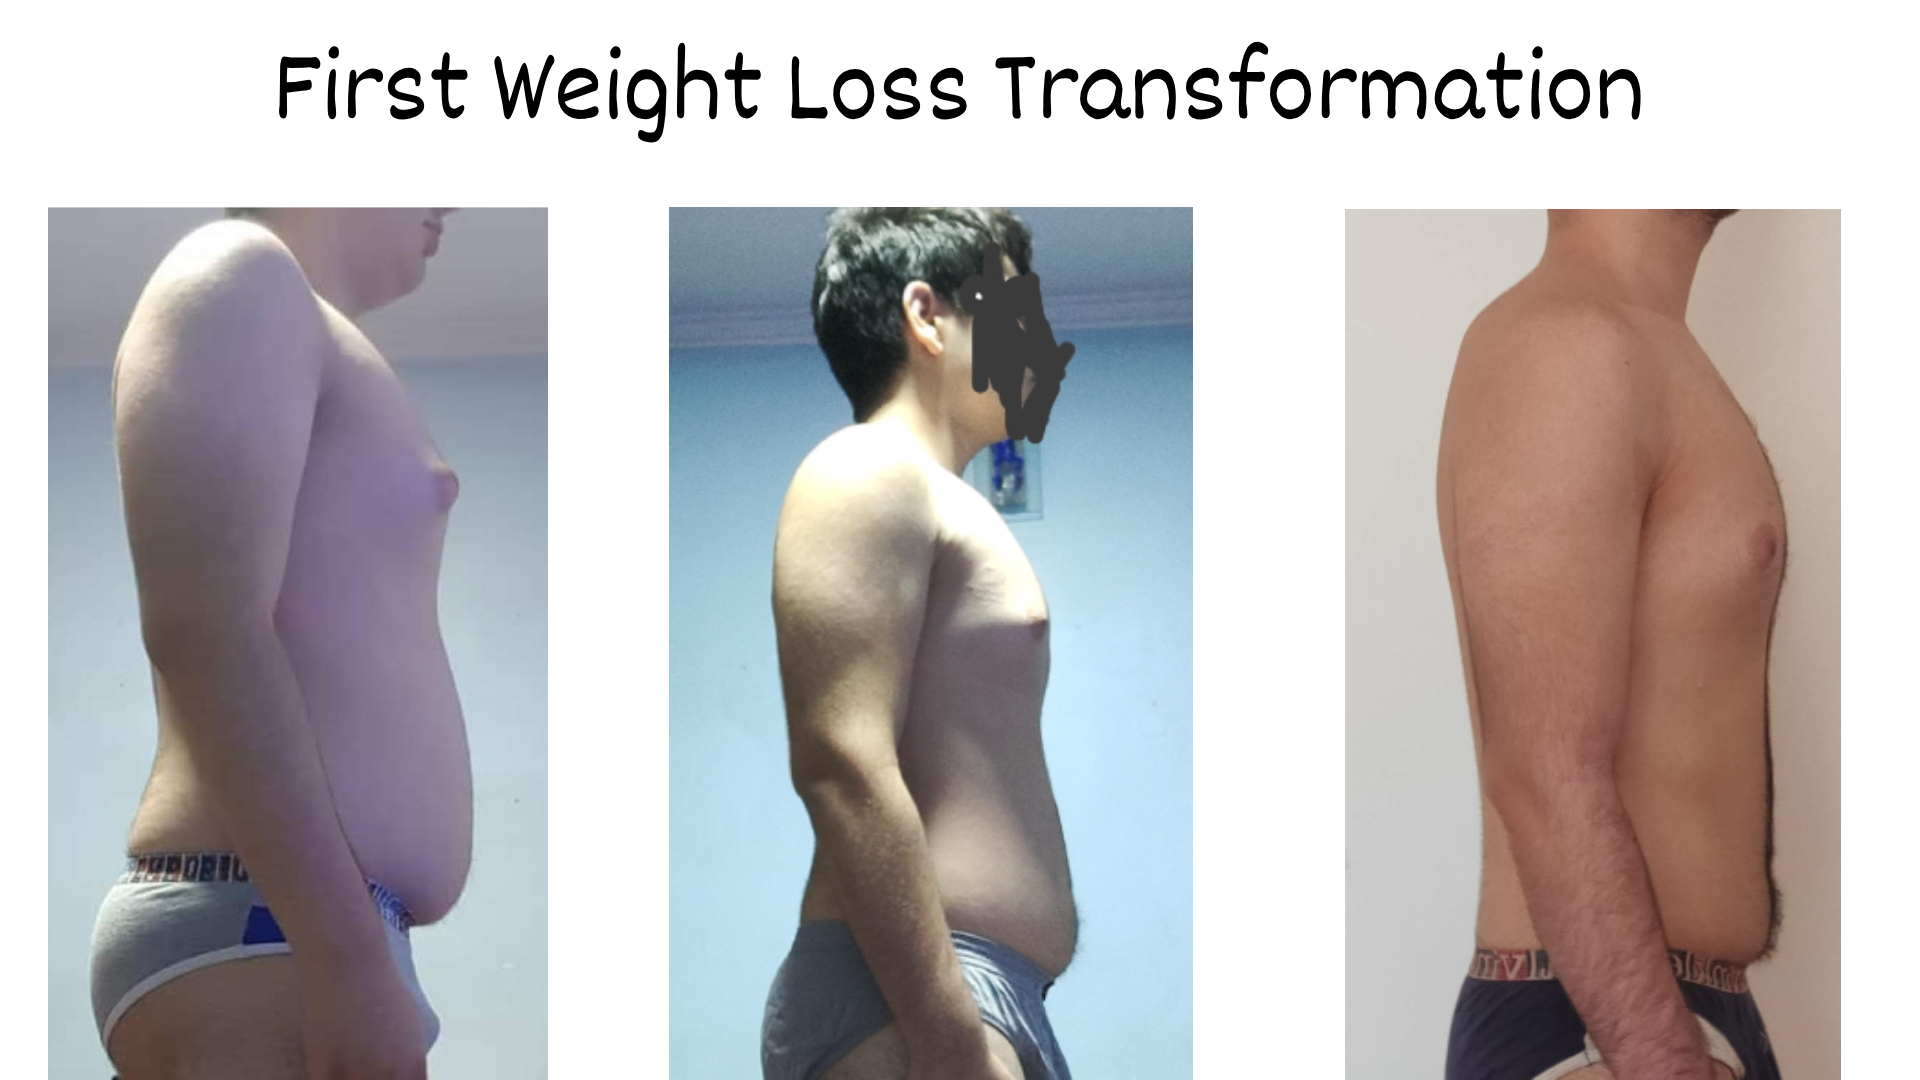 My first weight loss transformation - image